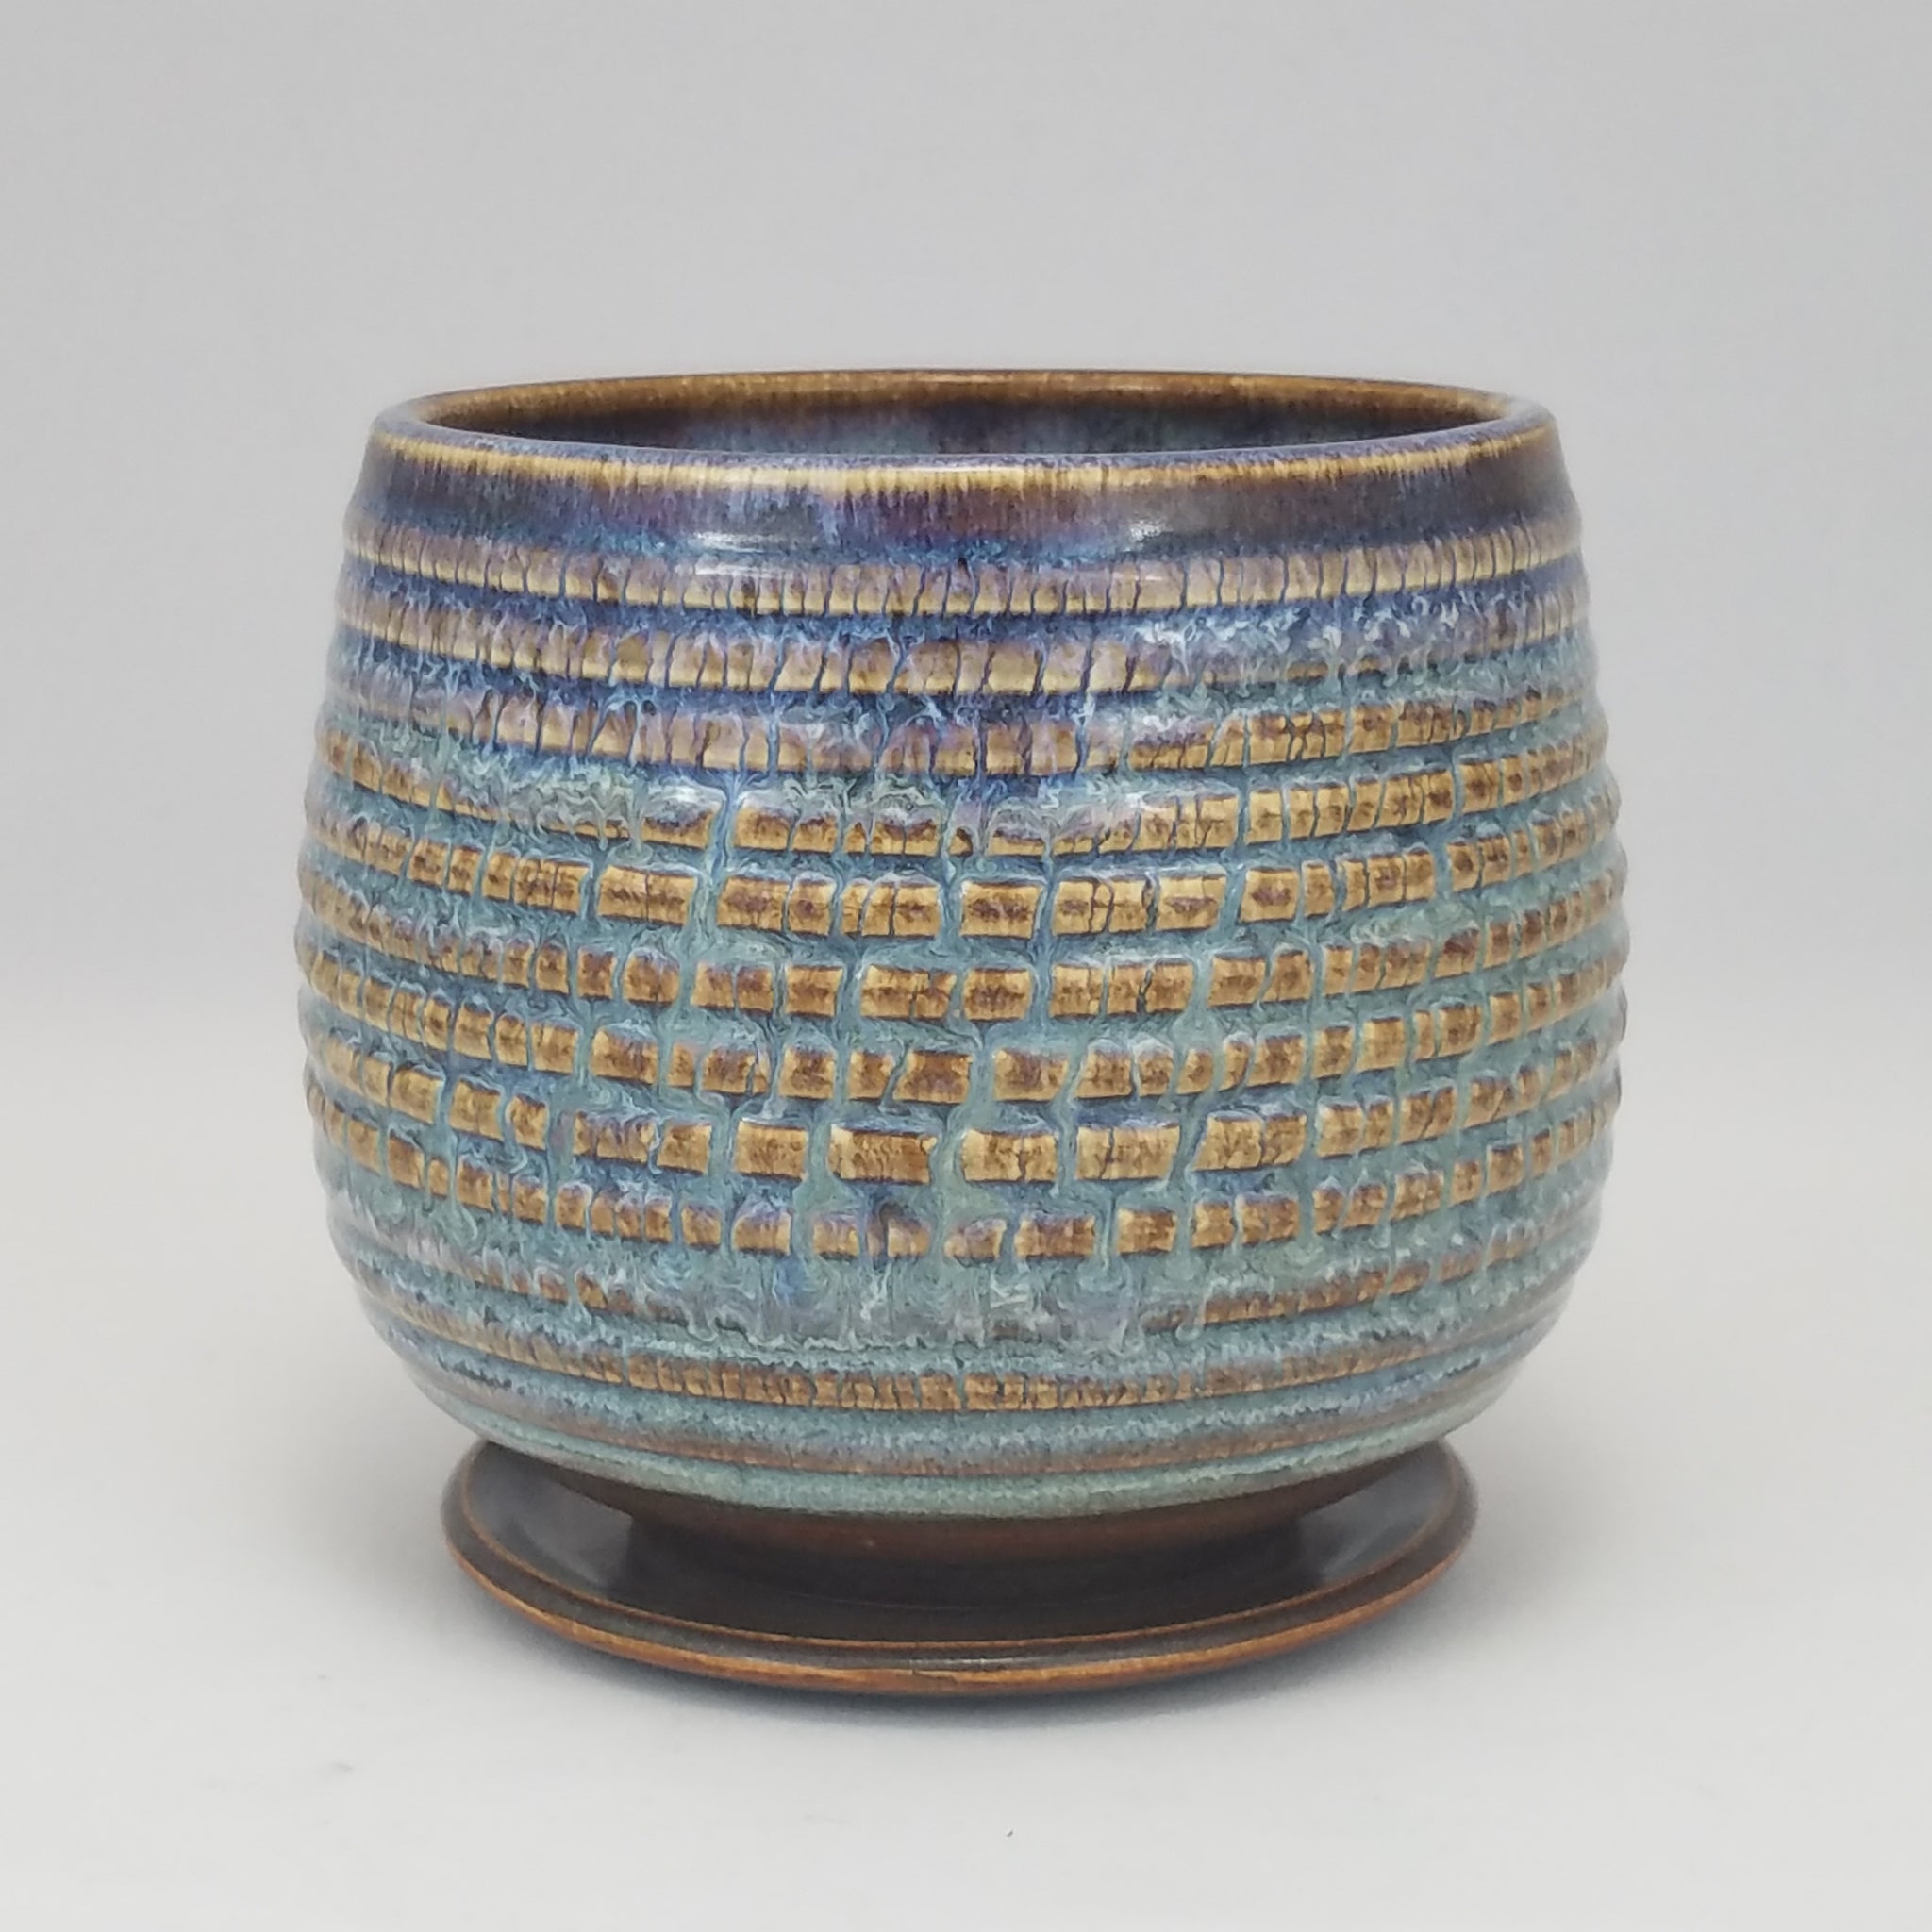 Textured Planter with Magic Glaze (5 in / 13 cm tall)